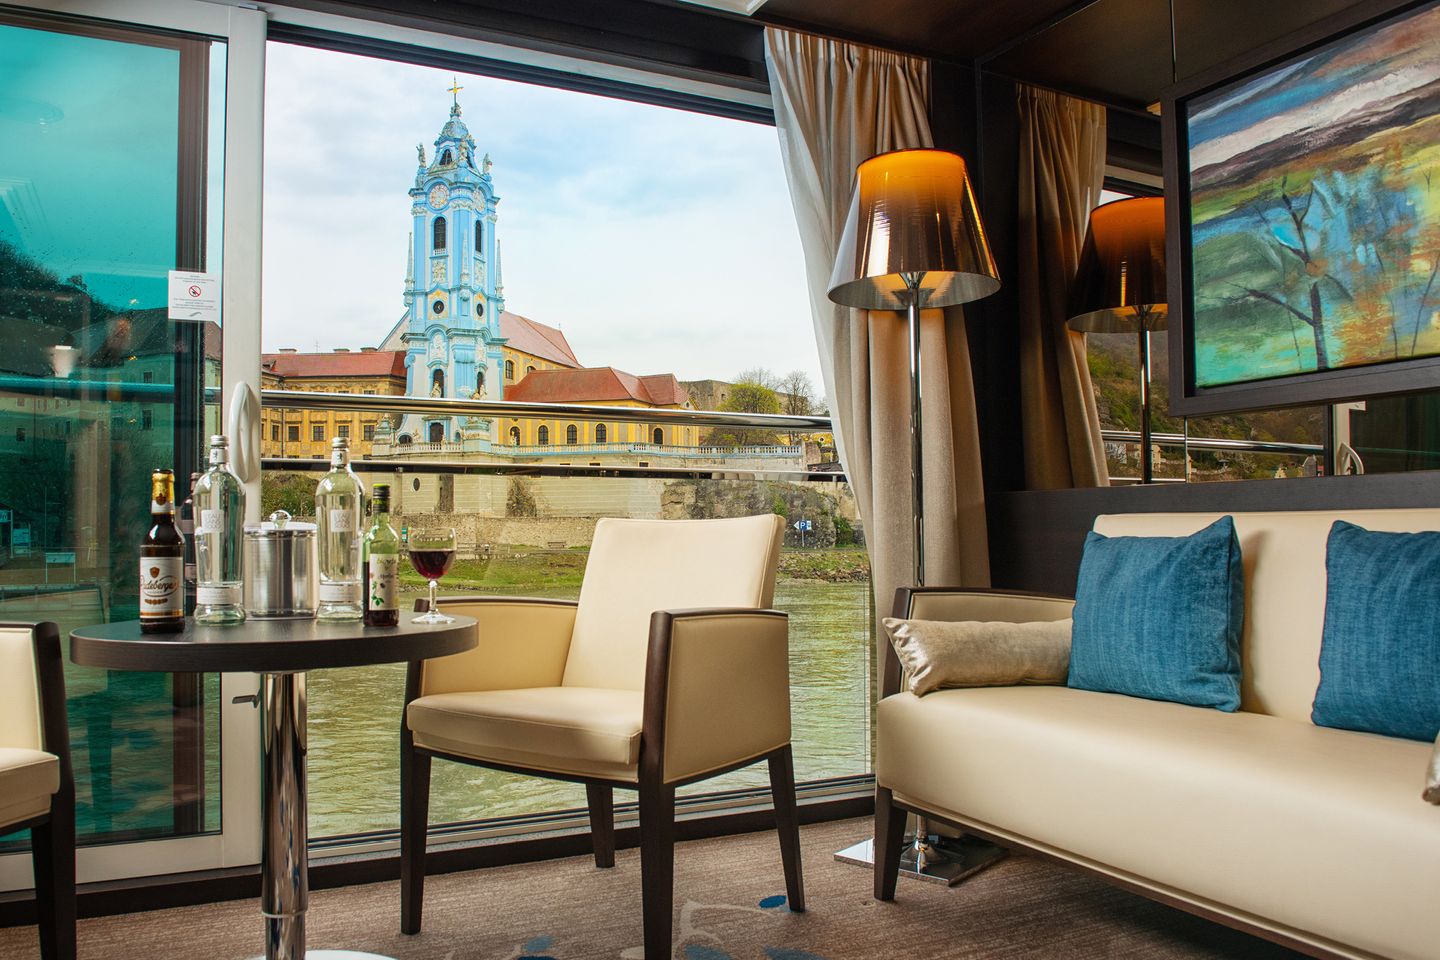 Active & Discovery On The Danube With 2 Nights In Prague (Westbound)